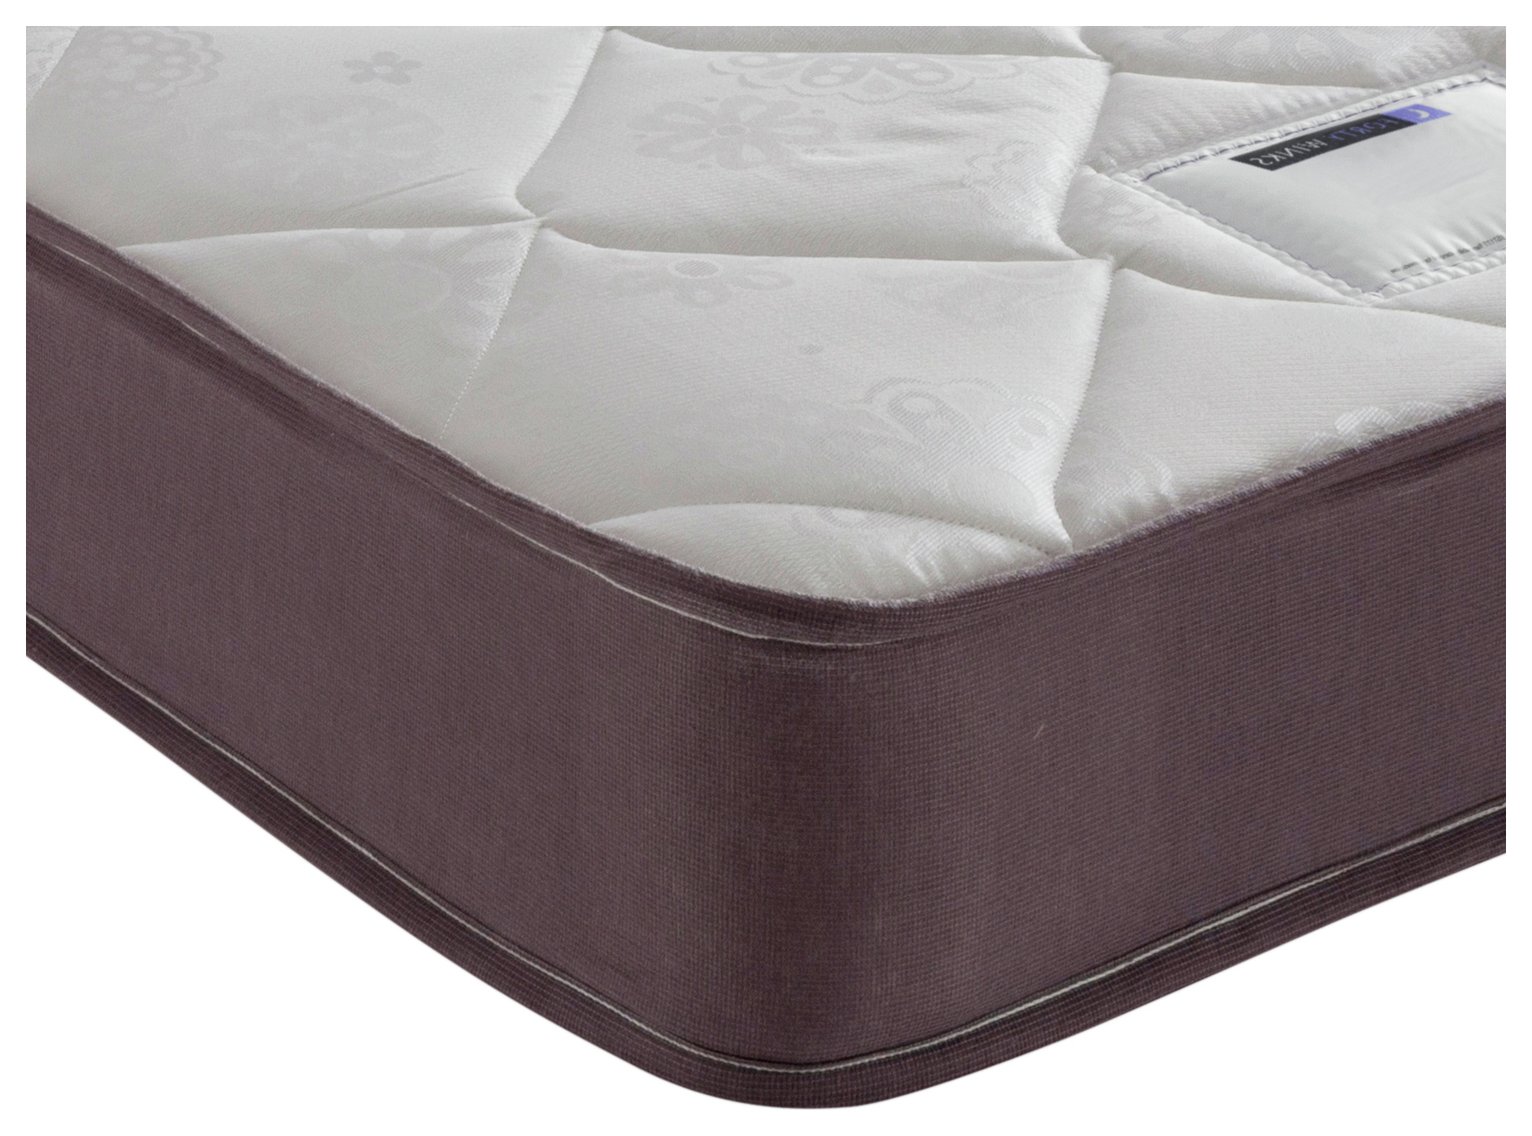 forty winks mattress protector